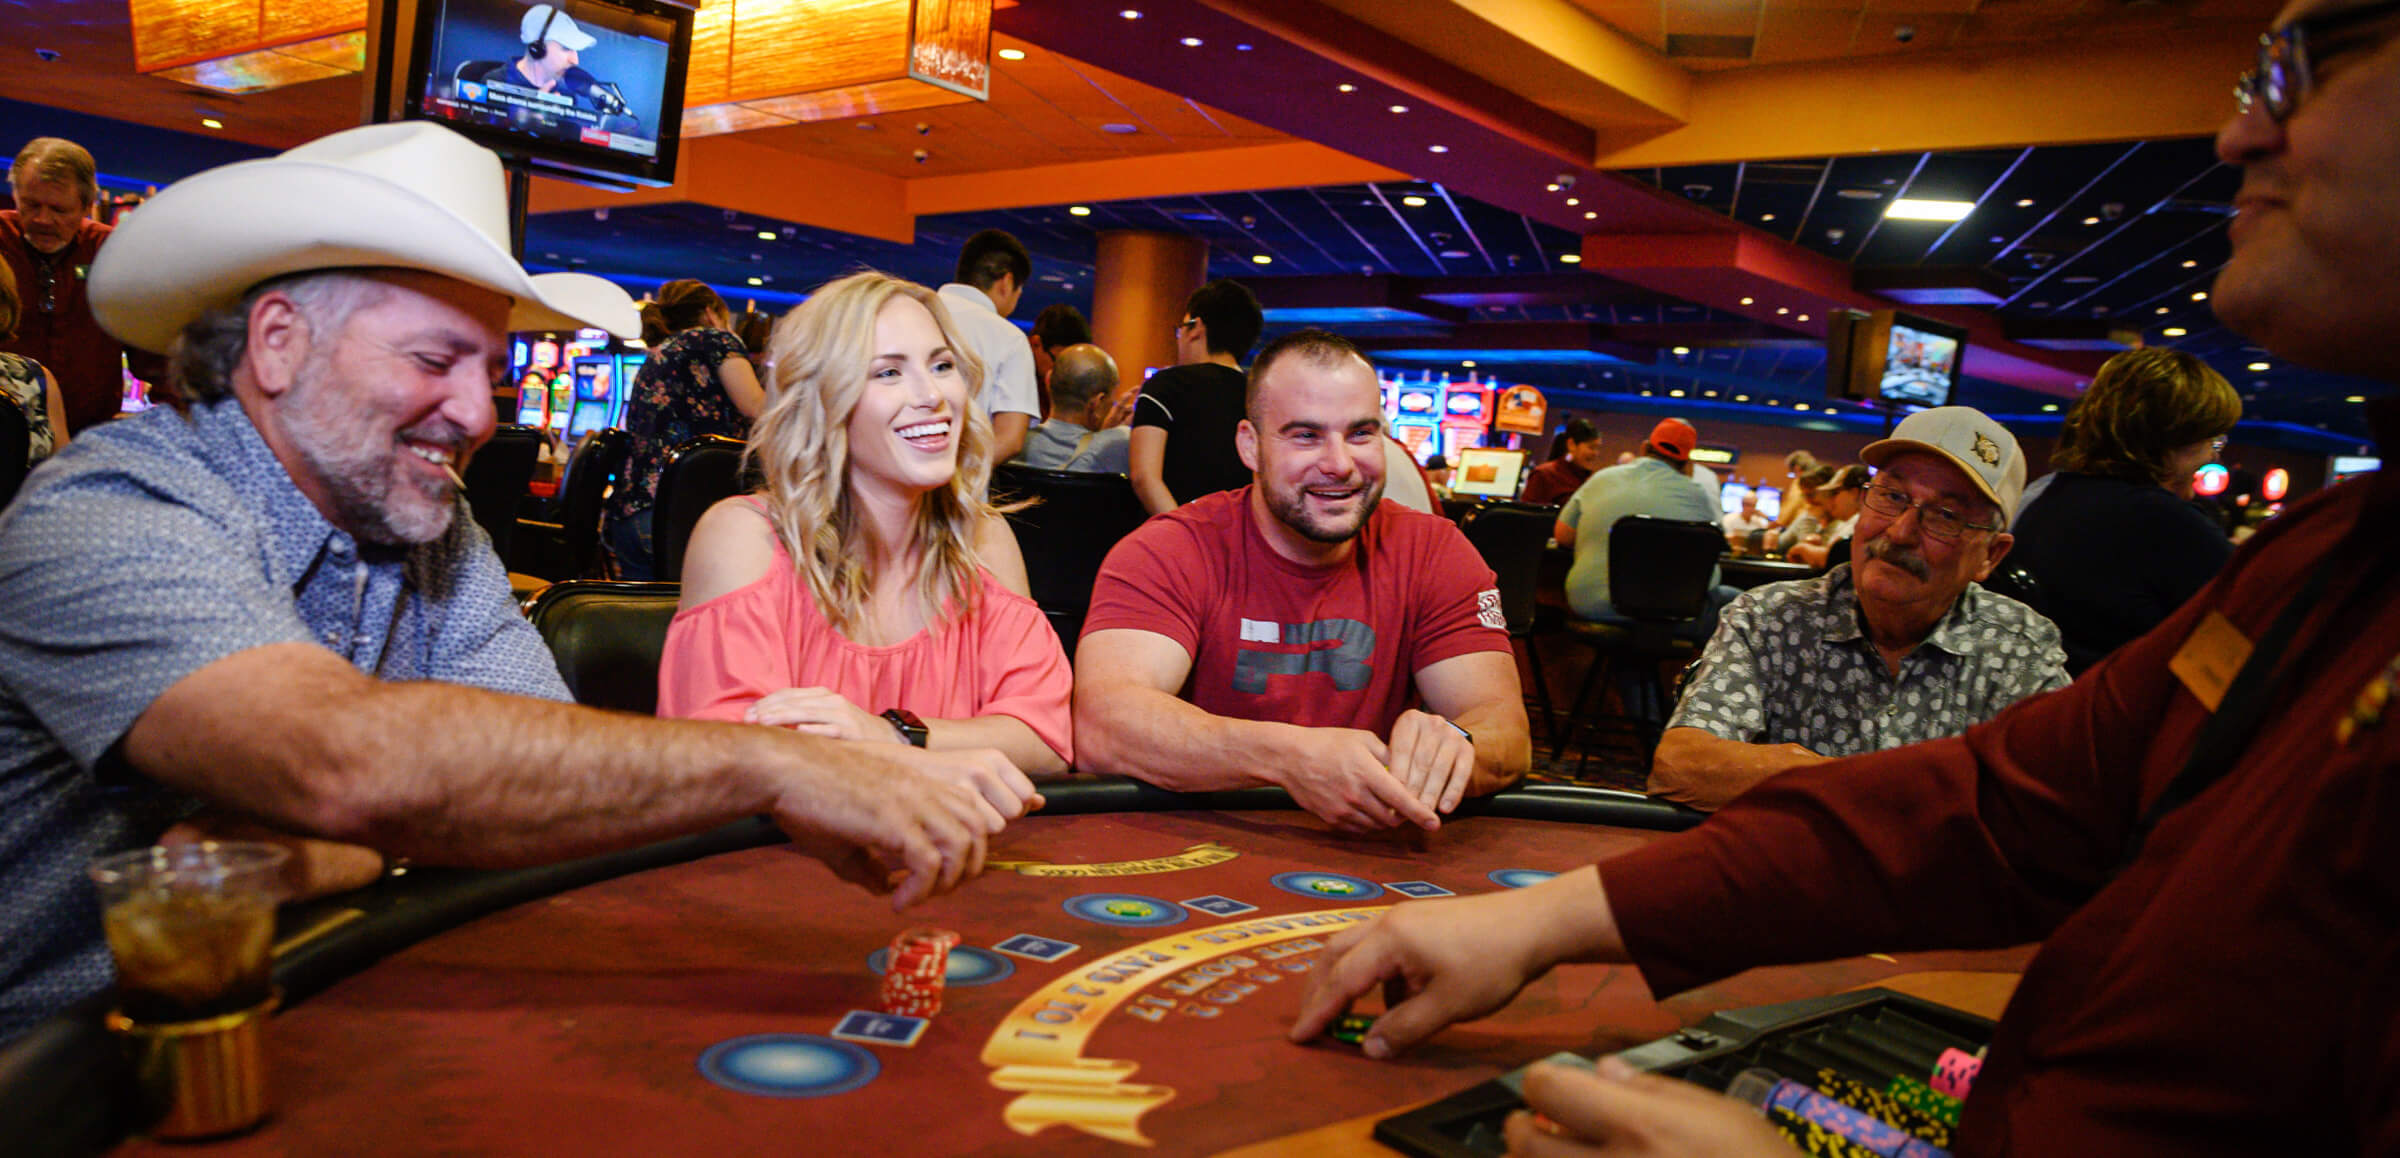 Players playing a card table game at Inn of the Mountain Gods Casino.